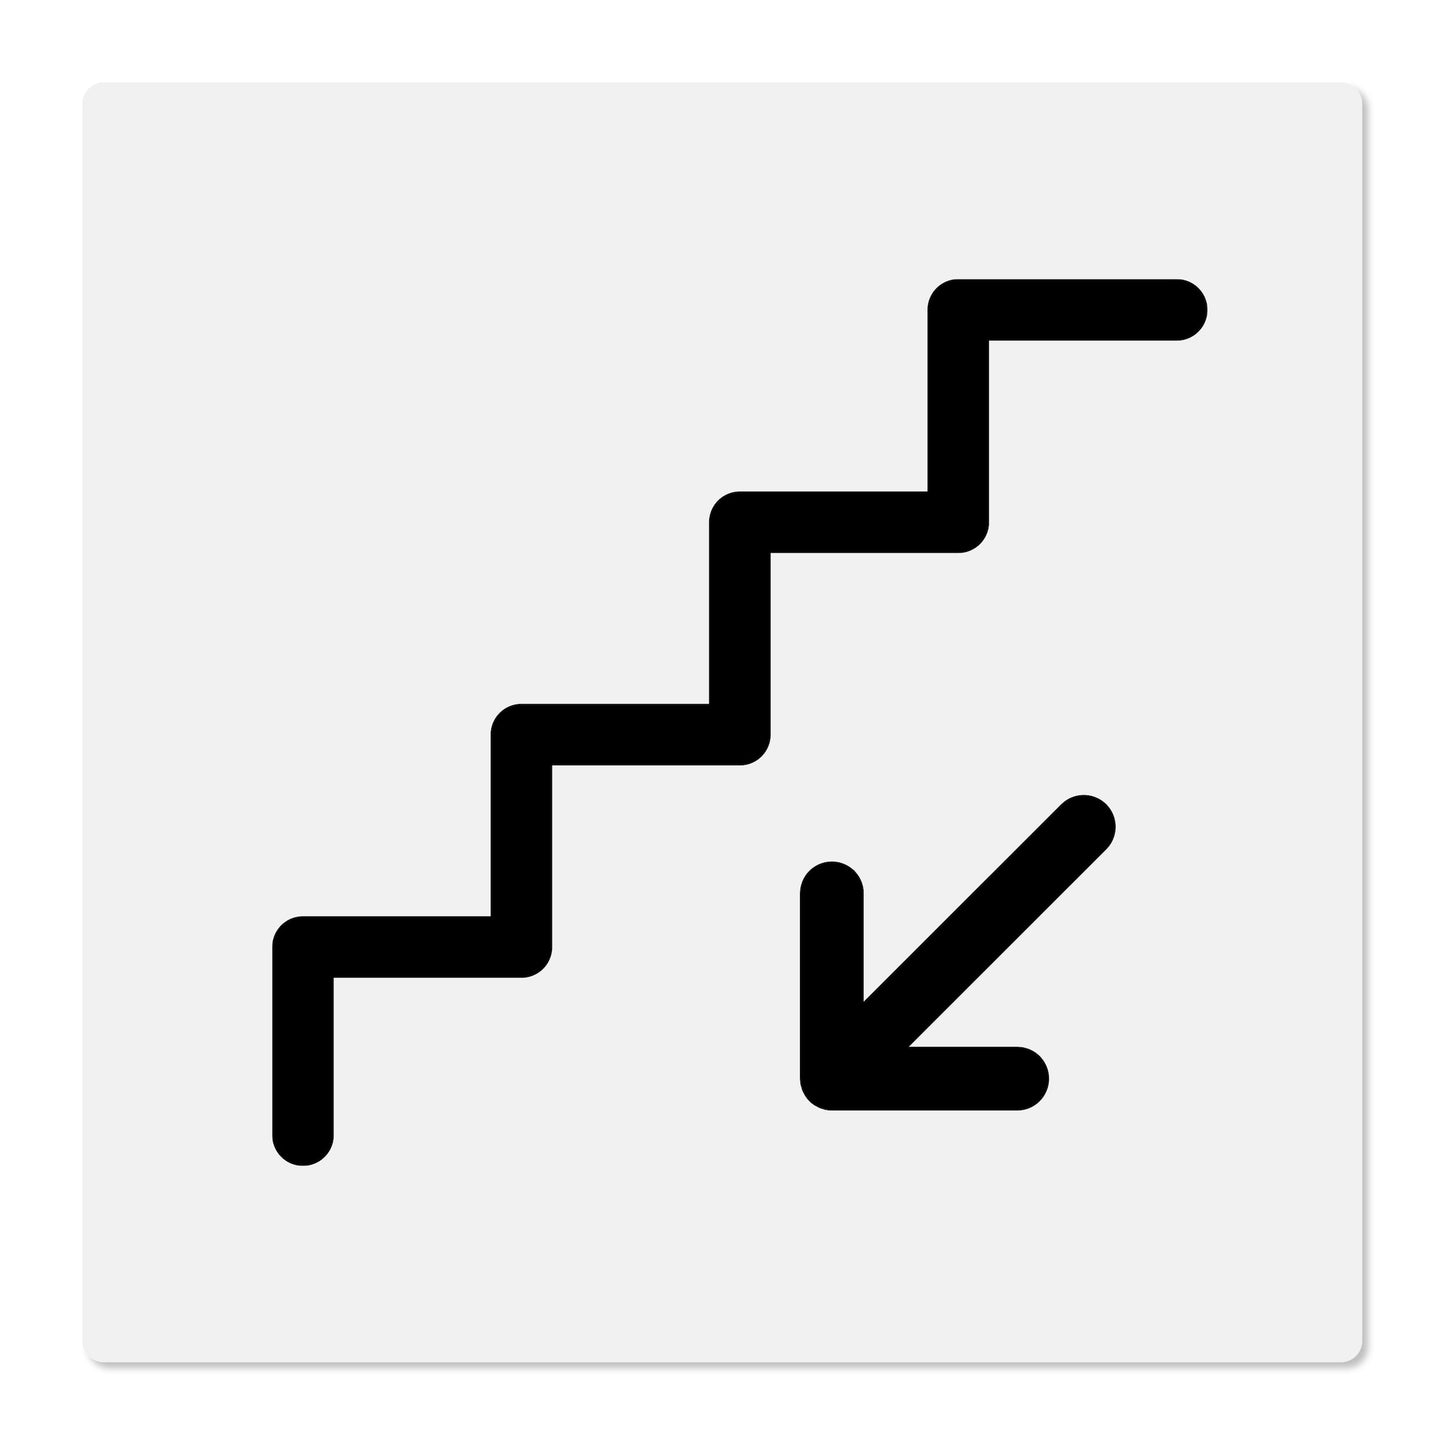 Down Stairs (Pictogram)